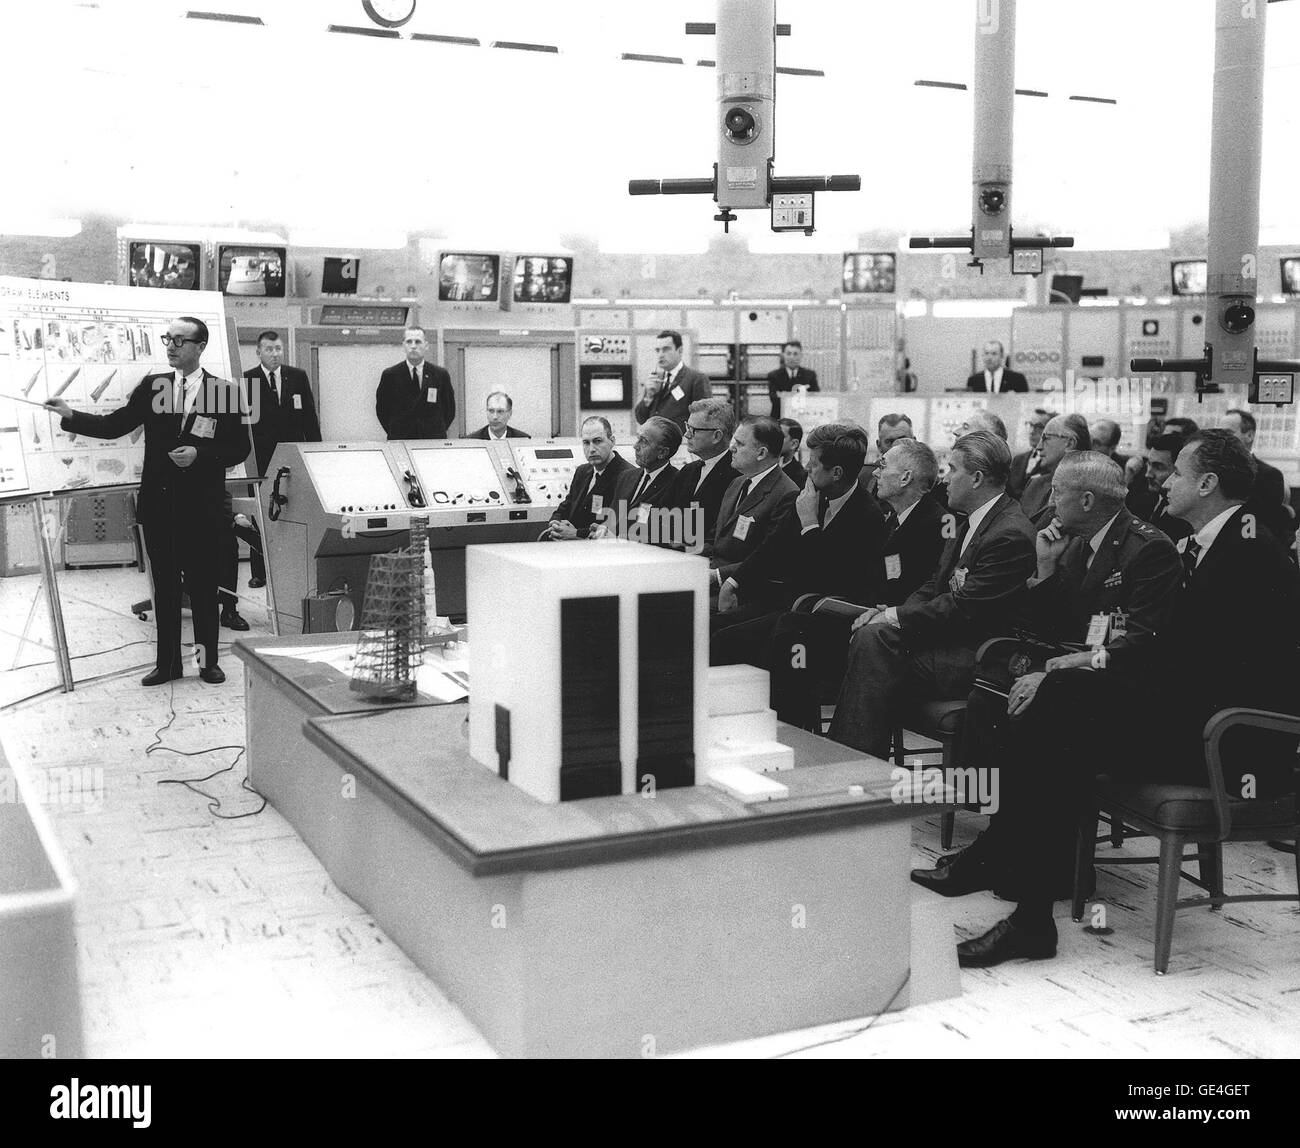 (November 16, 1963) Dr. George Mueller gives Saturn V orientation to President John F. Kennedy and officals in Blockhouse 37. Front row, left to right: George Low, Dr. Kurt Debus, Dr. Robert Seamans, James Webb, President Kennedy, Dr. Hugh Dryden, Dr. Wernher von Braun, General Leighten Davis, and Senator George Smathers.                                                             Image # : 1963ADM-1 Stock Photo